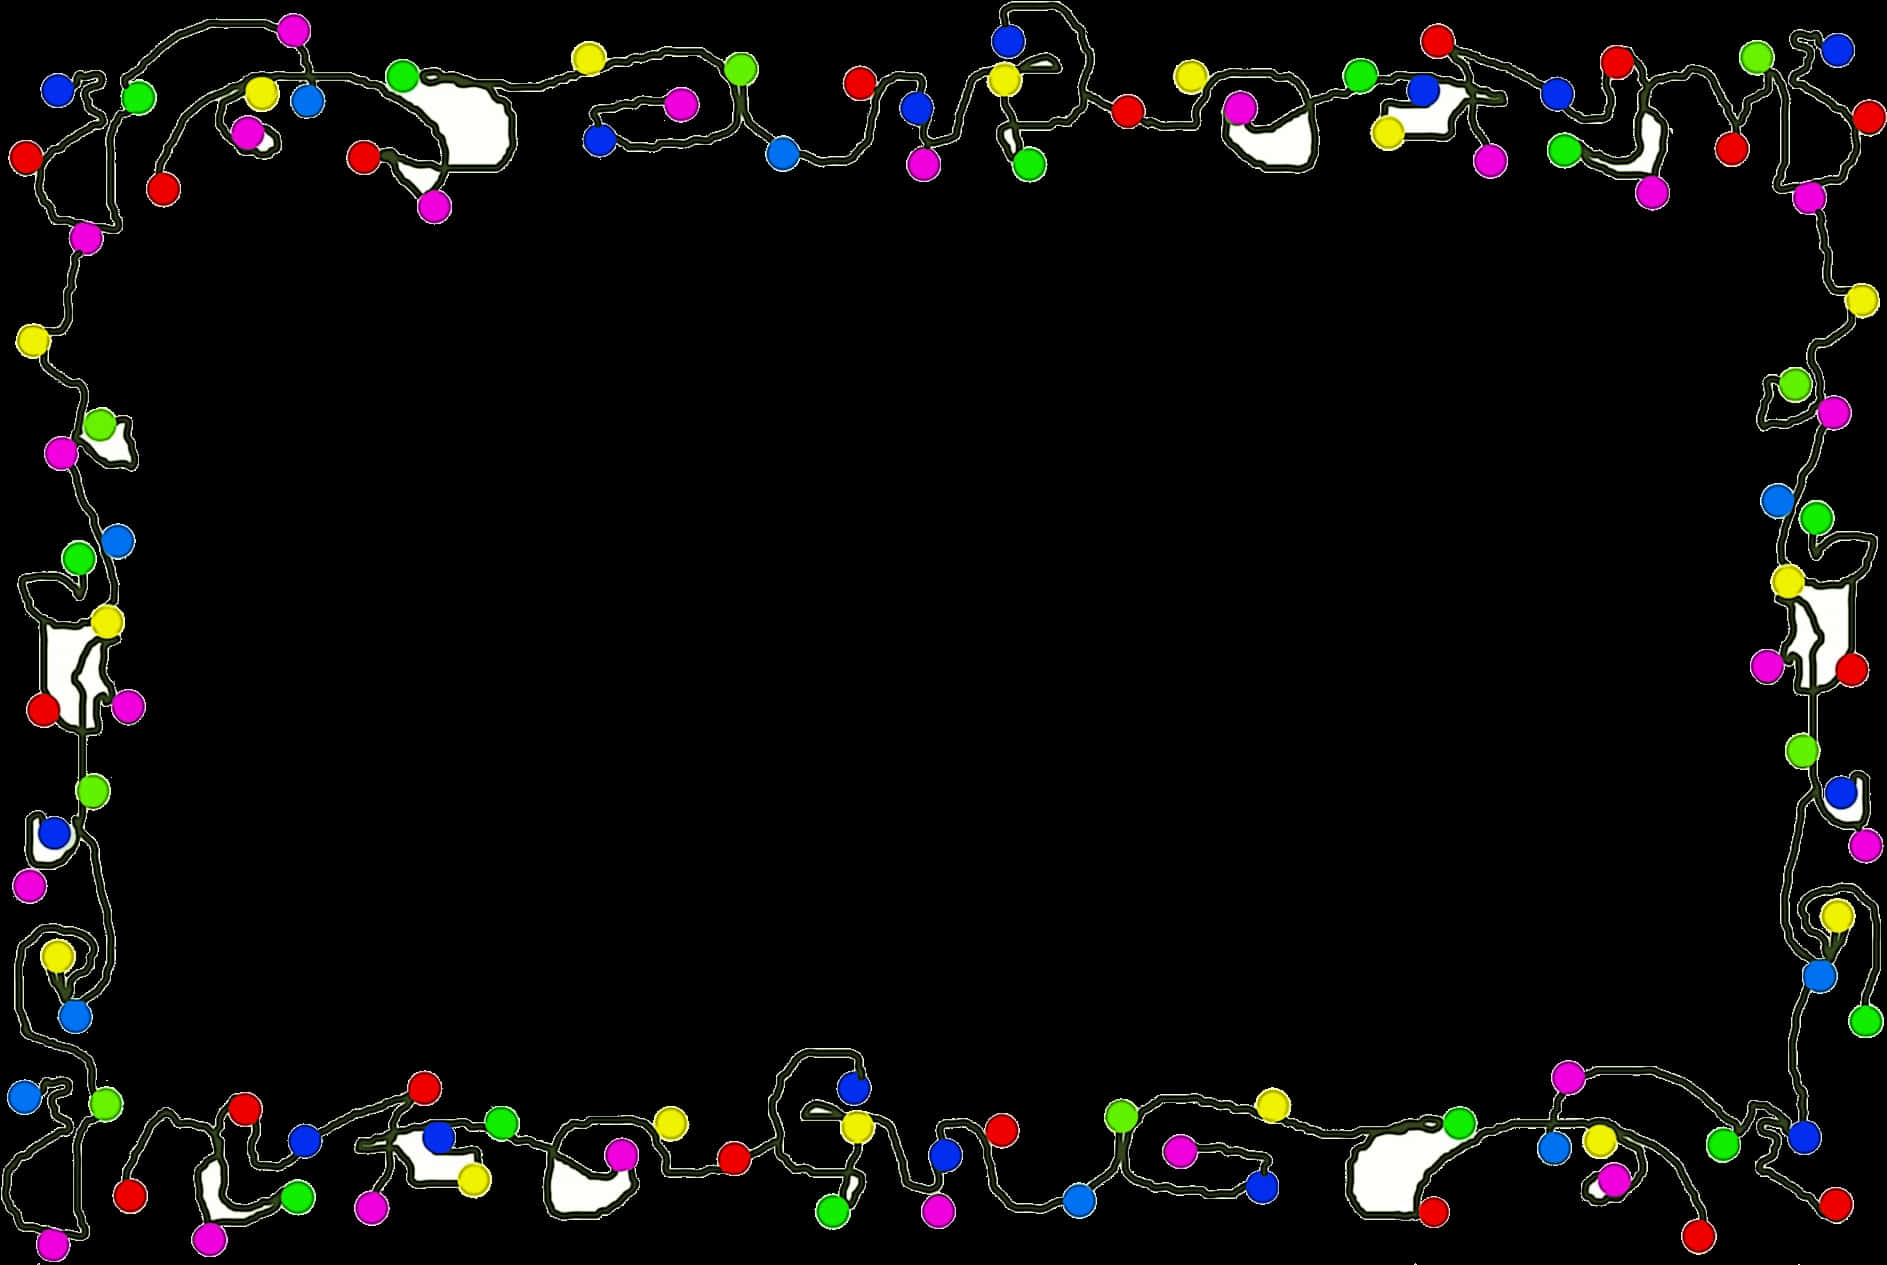 A Black Rectangle With Colorful Lights